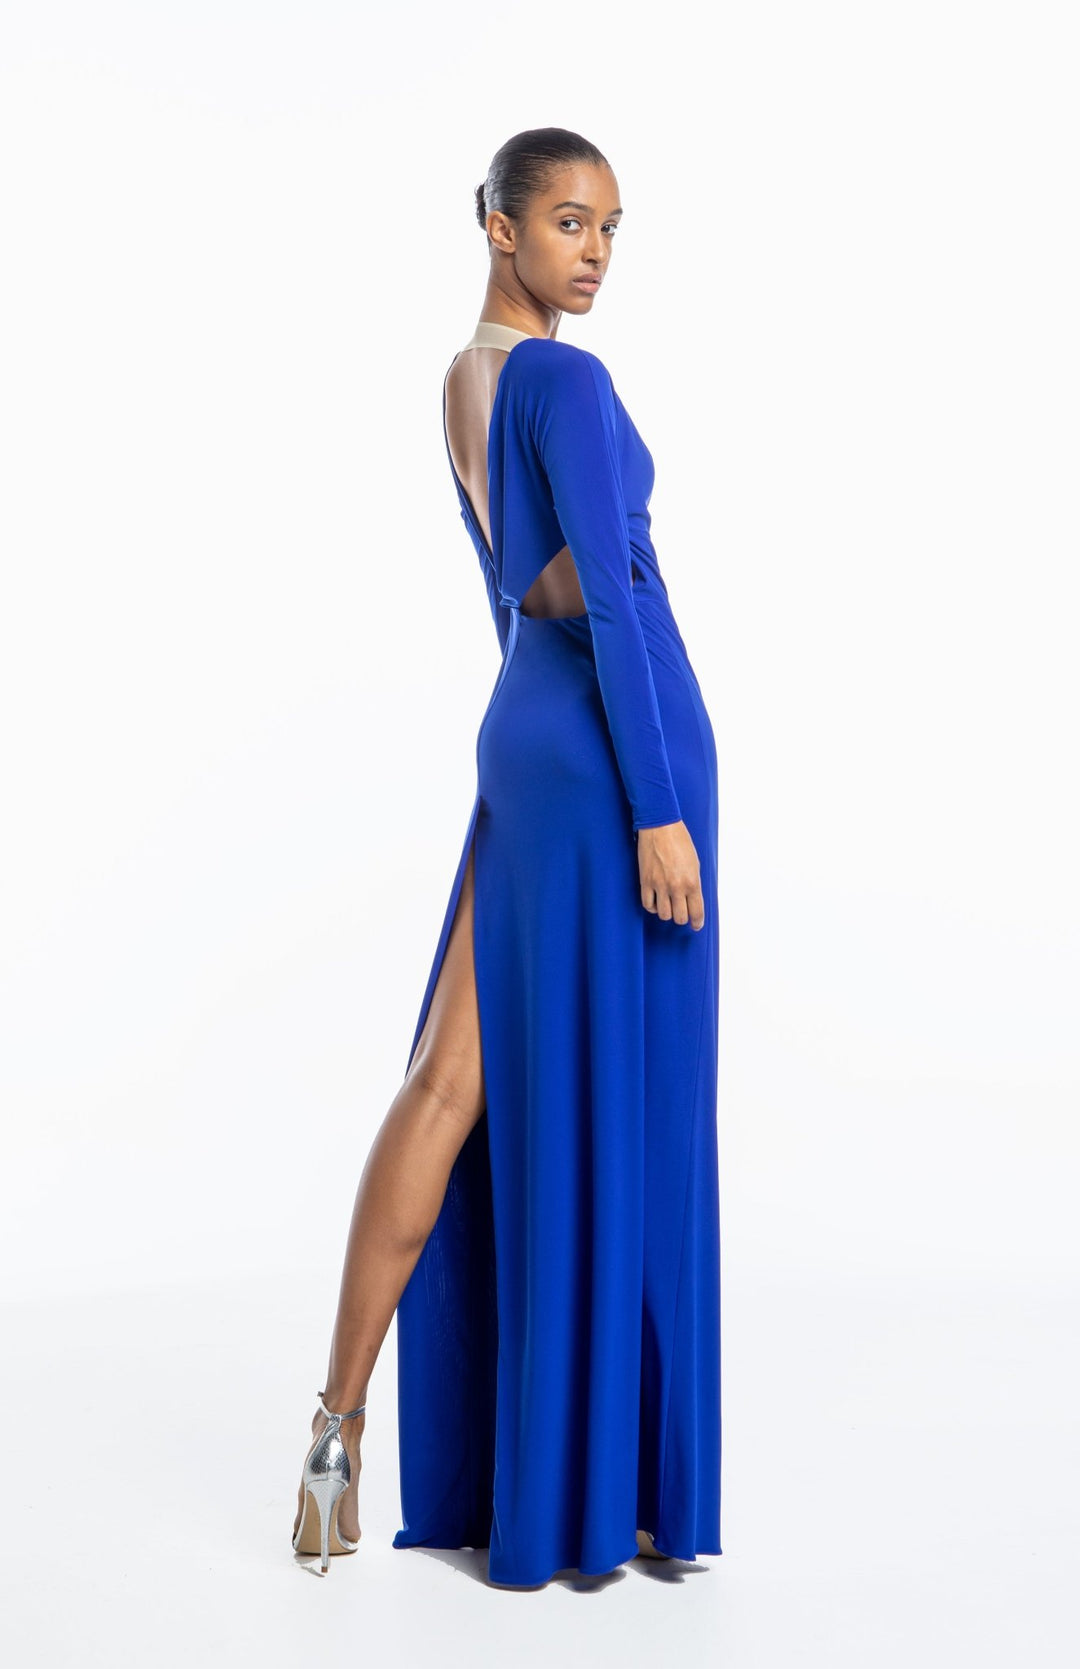 Grecian style, backless gown, with back cutout detail in royal blue jersey knit